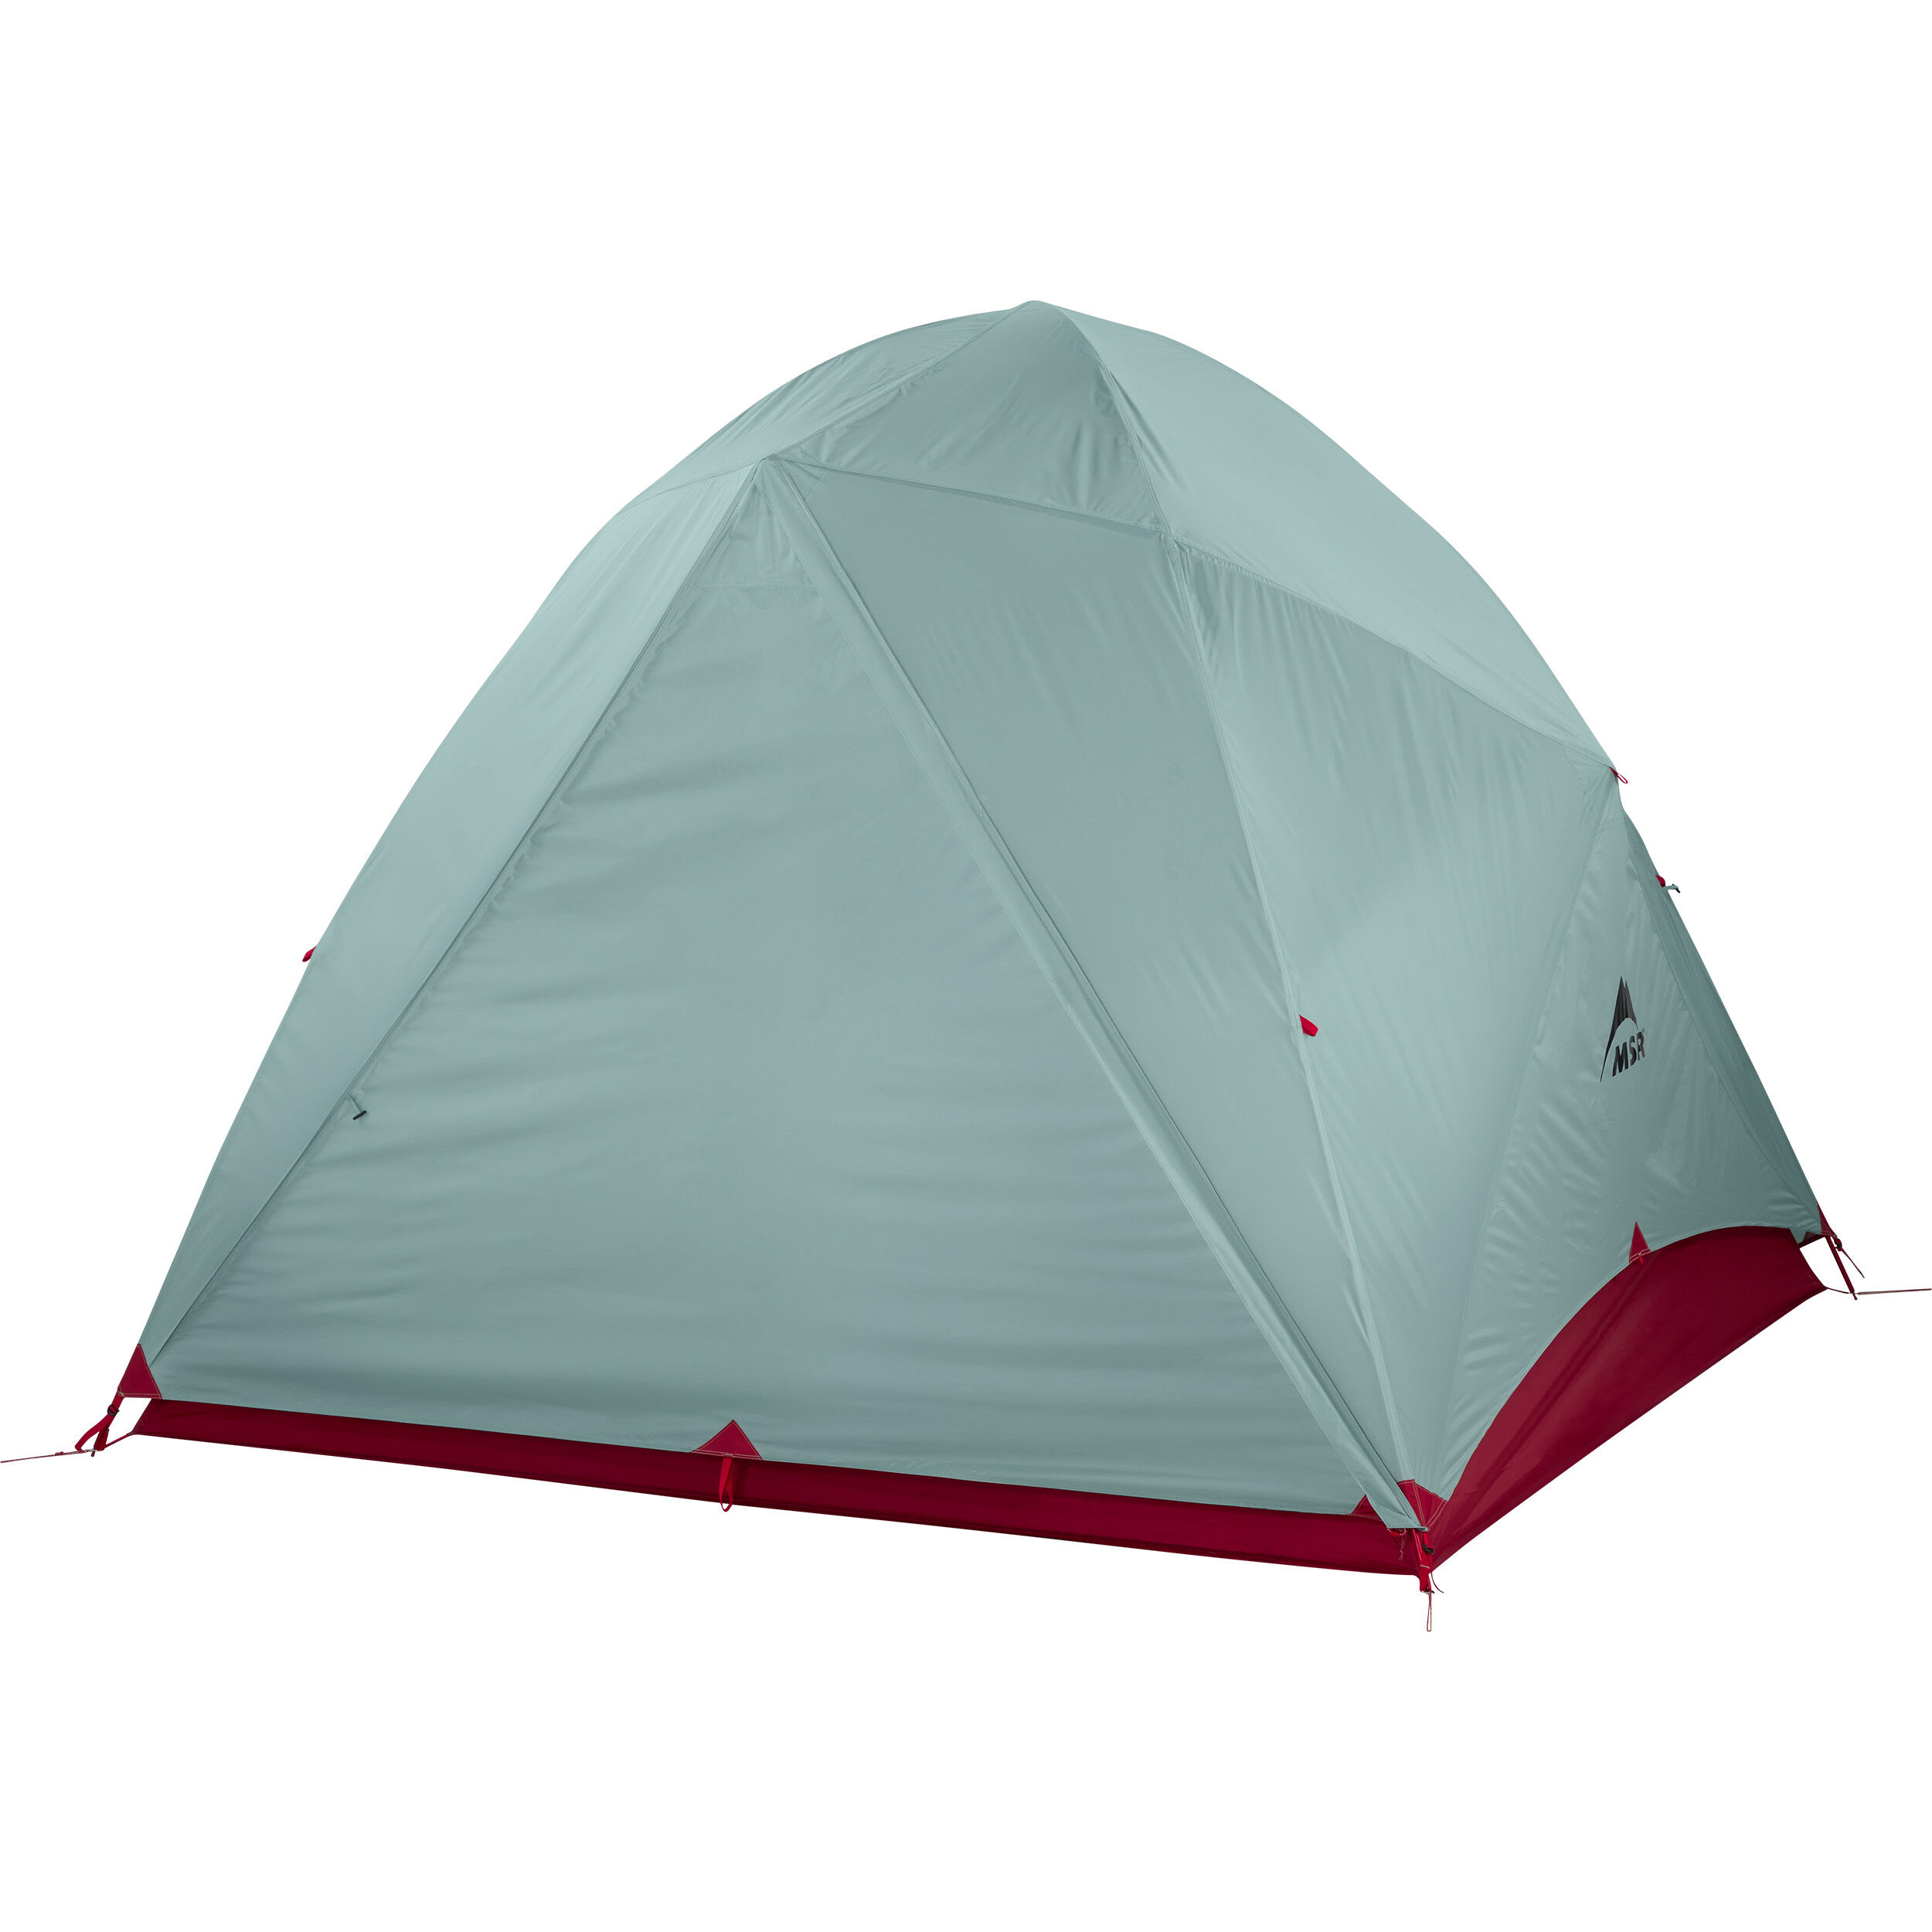 Habiscape™ 4 - Family Camping 4-Person Tent ǀ MSR®